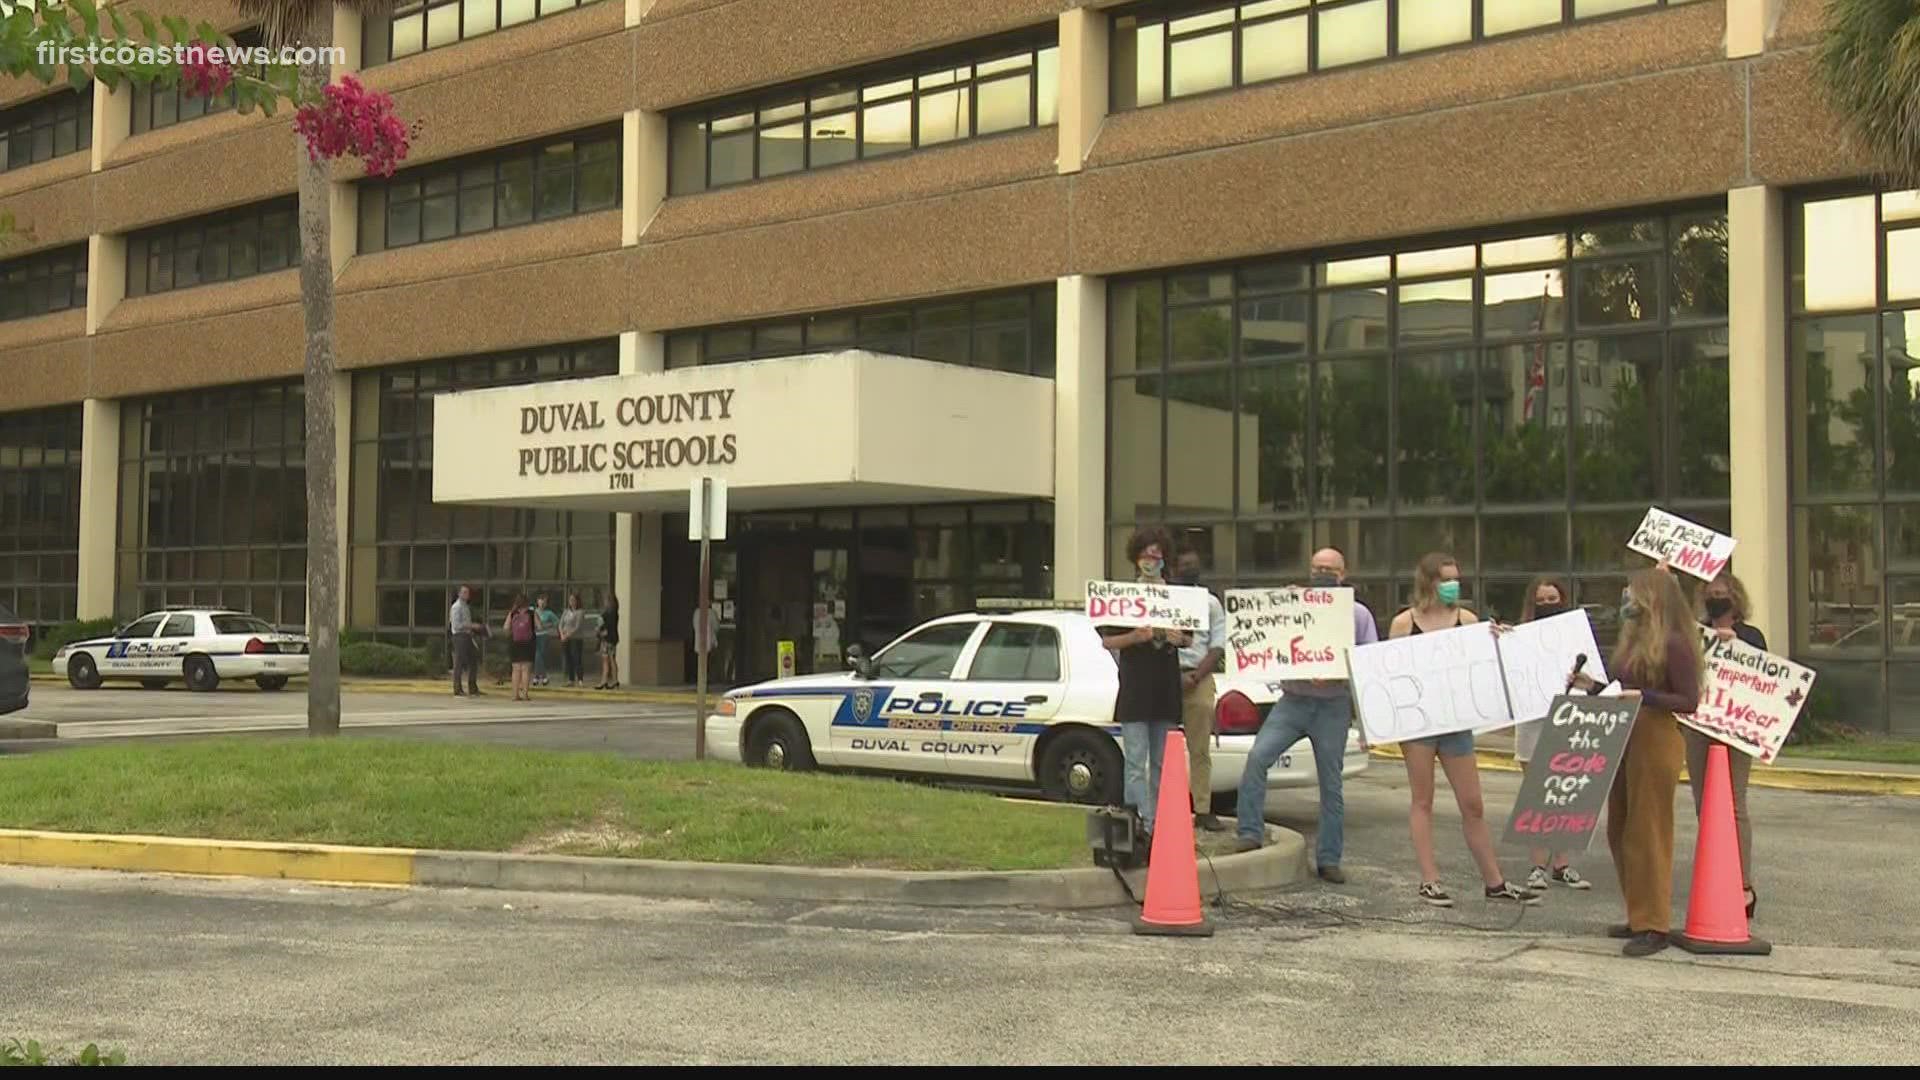 A protest took place Tuesday night at the Duval County Public Schools building.